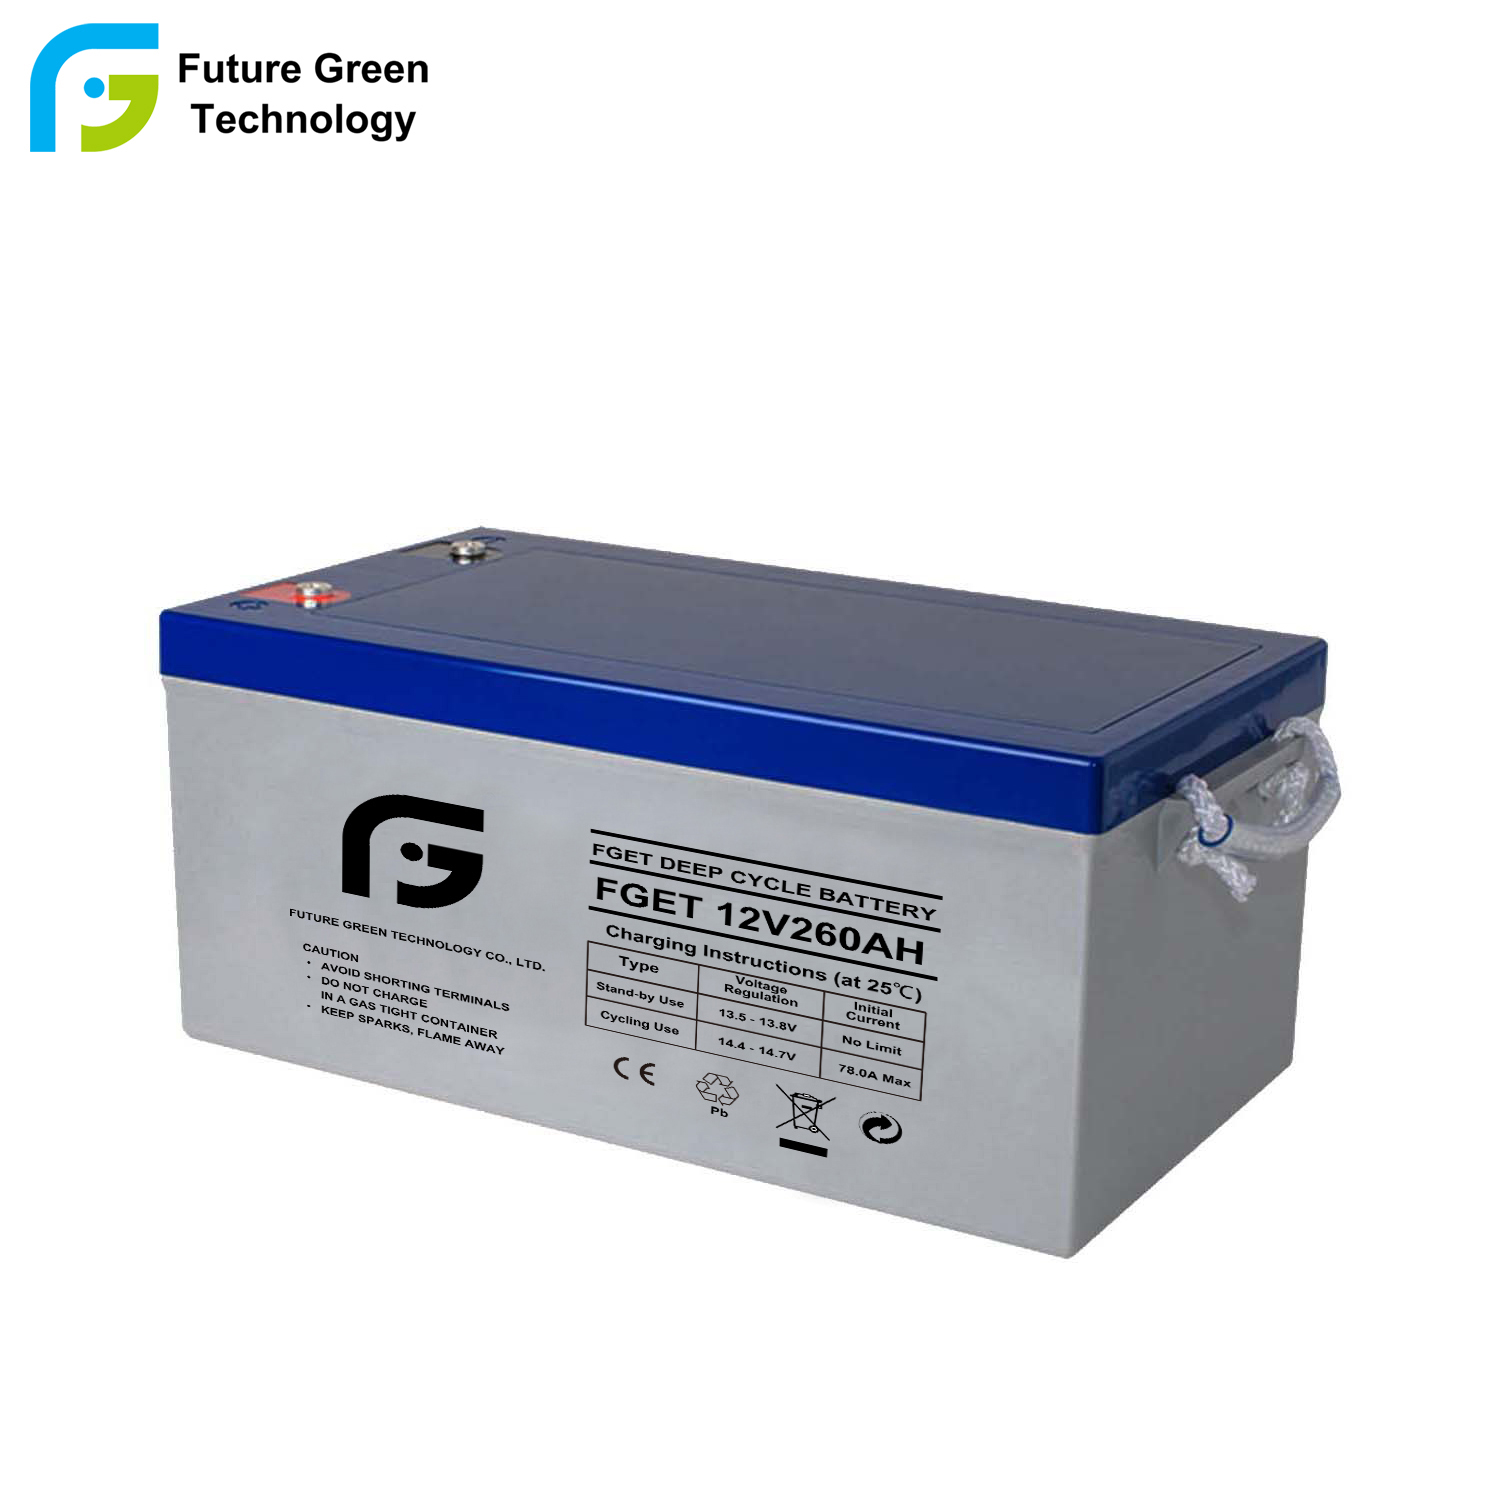 12V 260AH Deep Cycle Storage Battery for Hospital Equipment